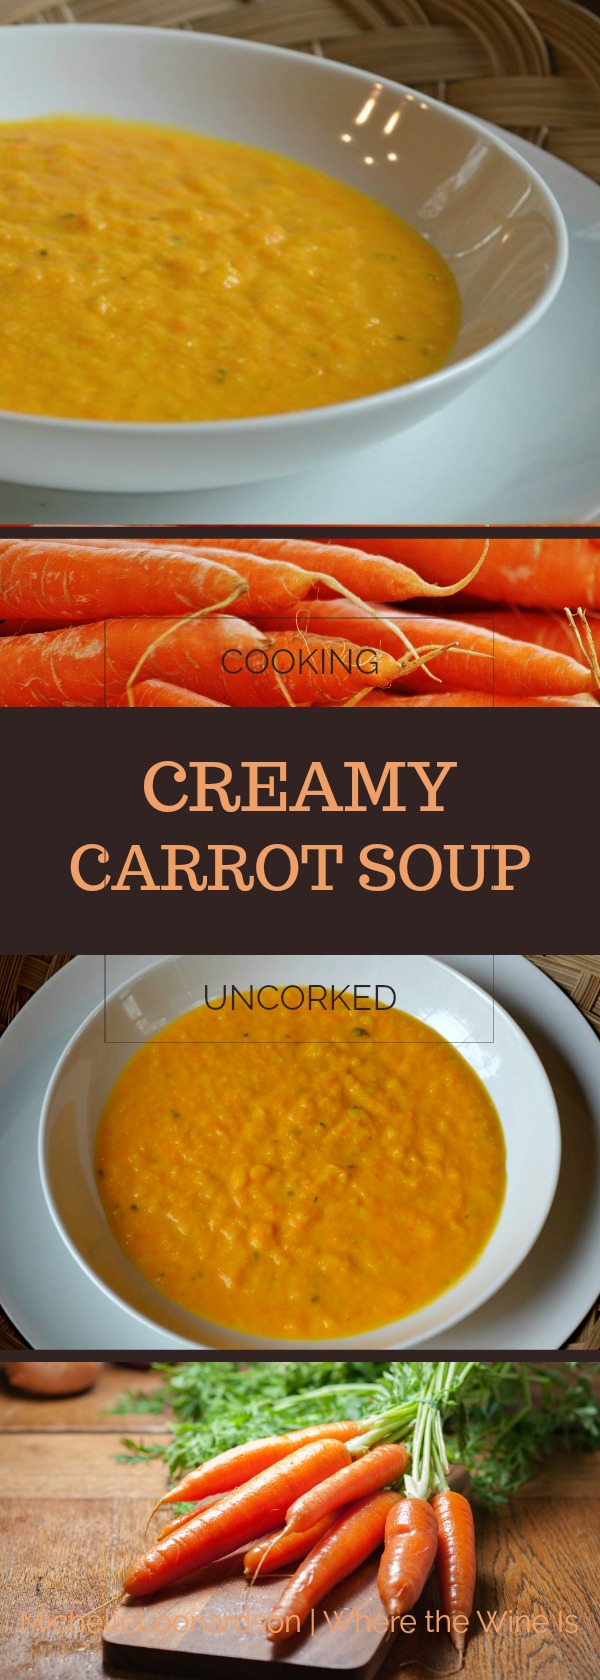 Add a splash of wine and liven the flavor to create the BEST carrot soup recipe! This hearty and healthy meal has a surprising substitute for heavy cream.